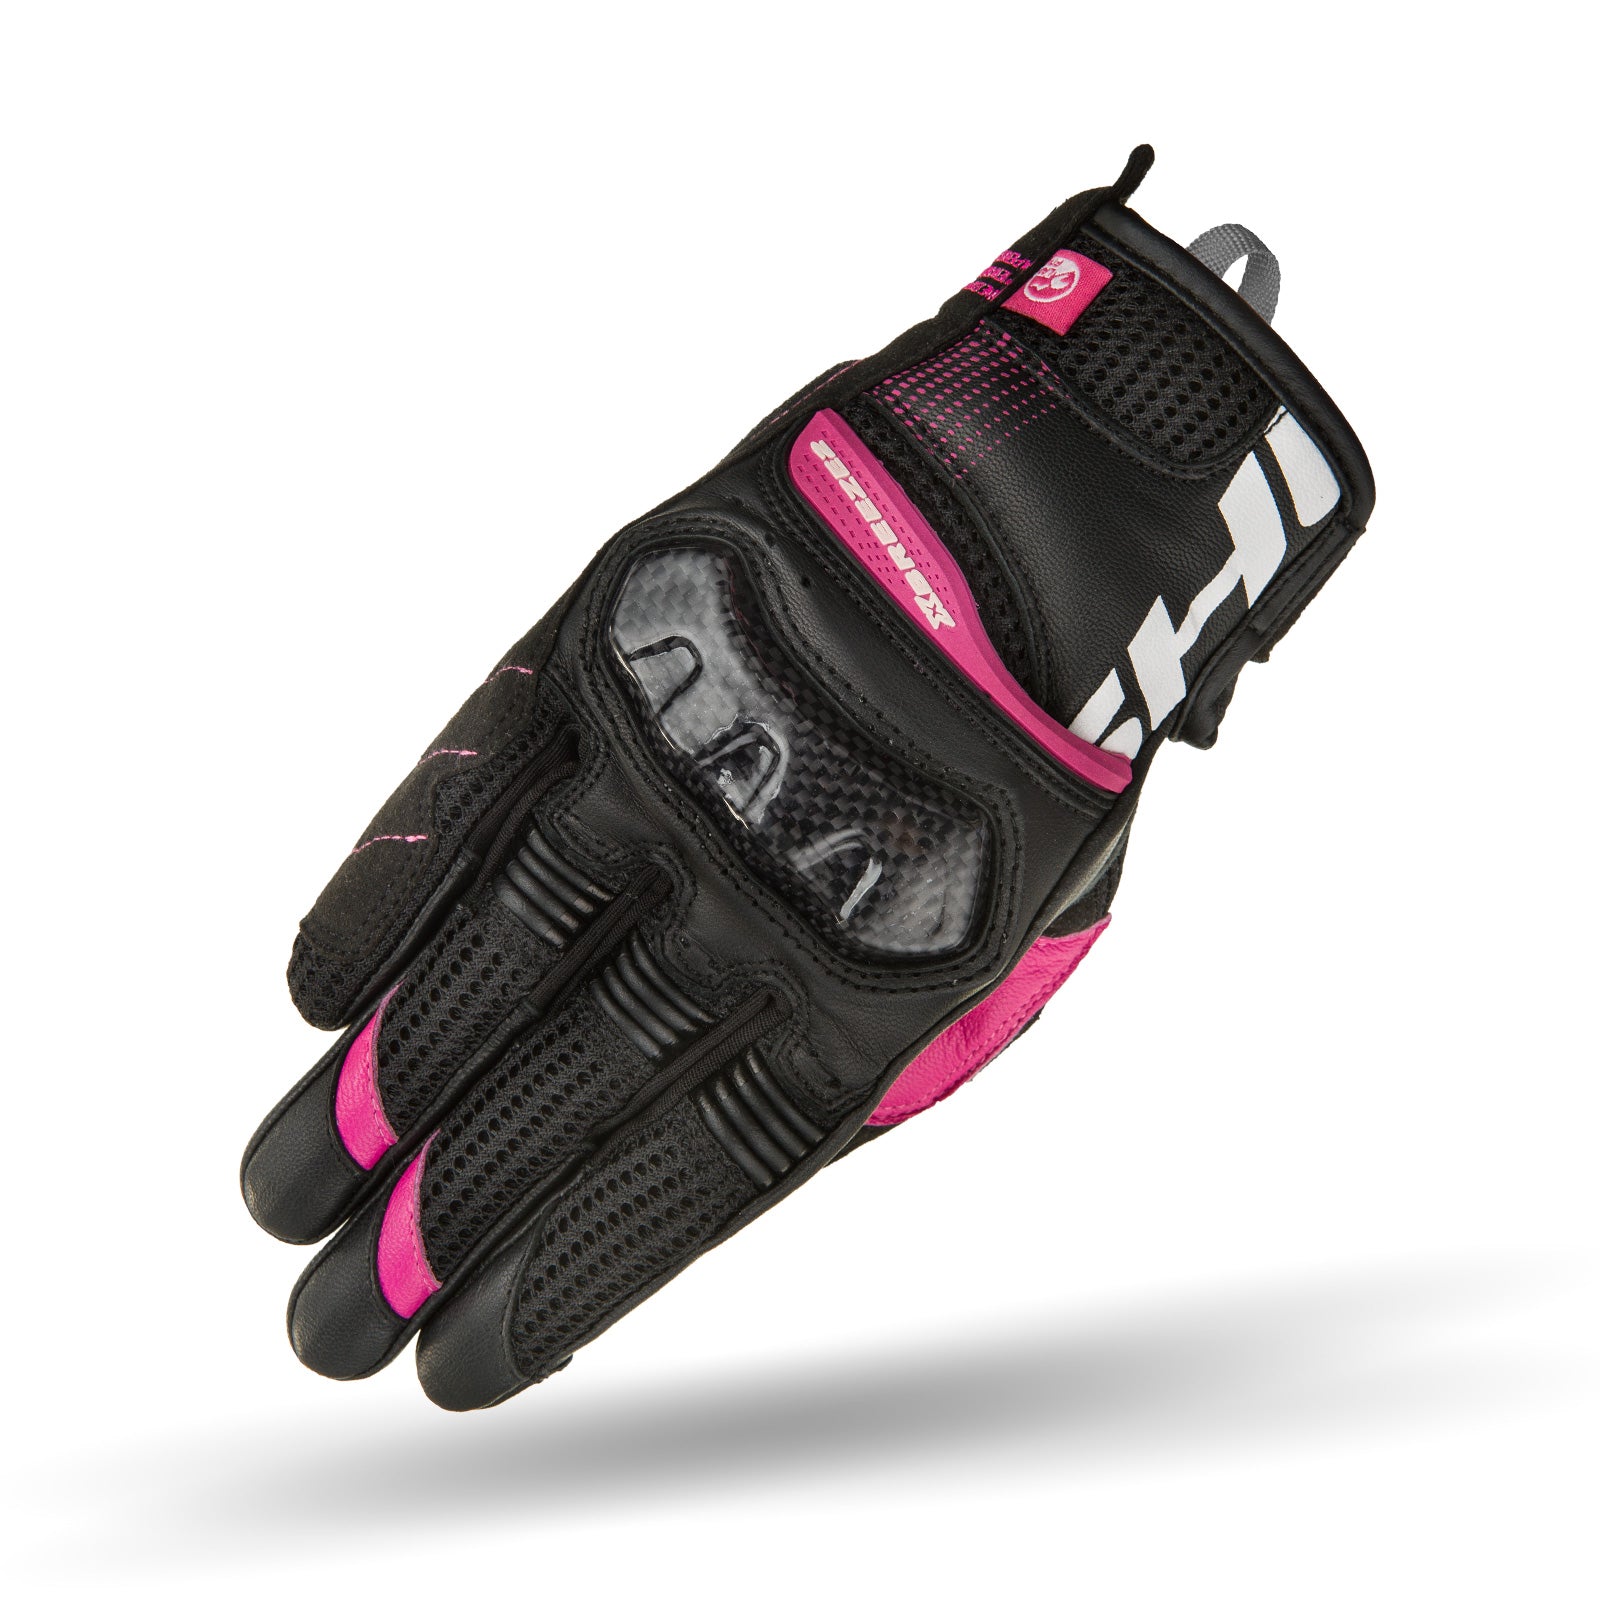 Black and pink women&#39;s motorcycle glove from Shima